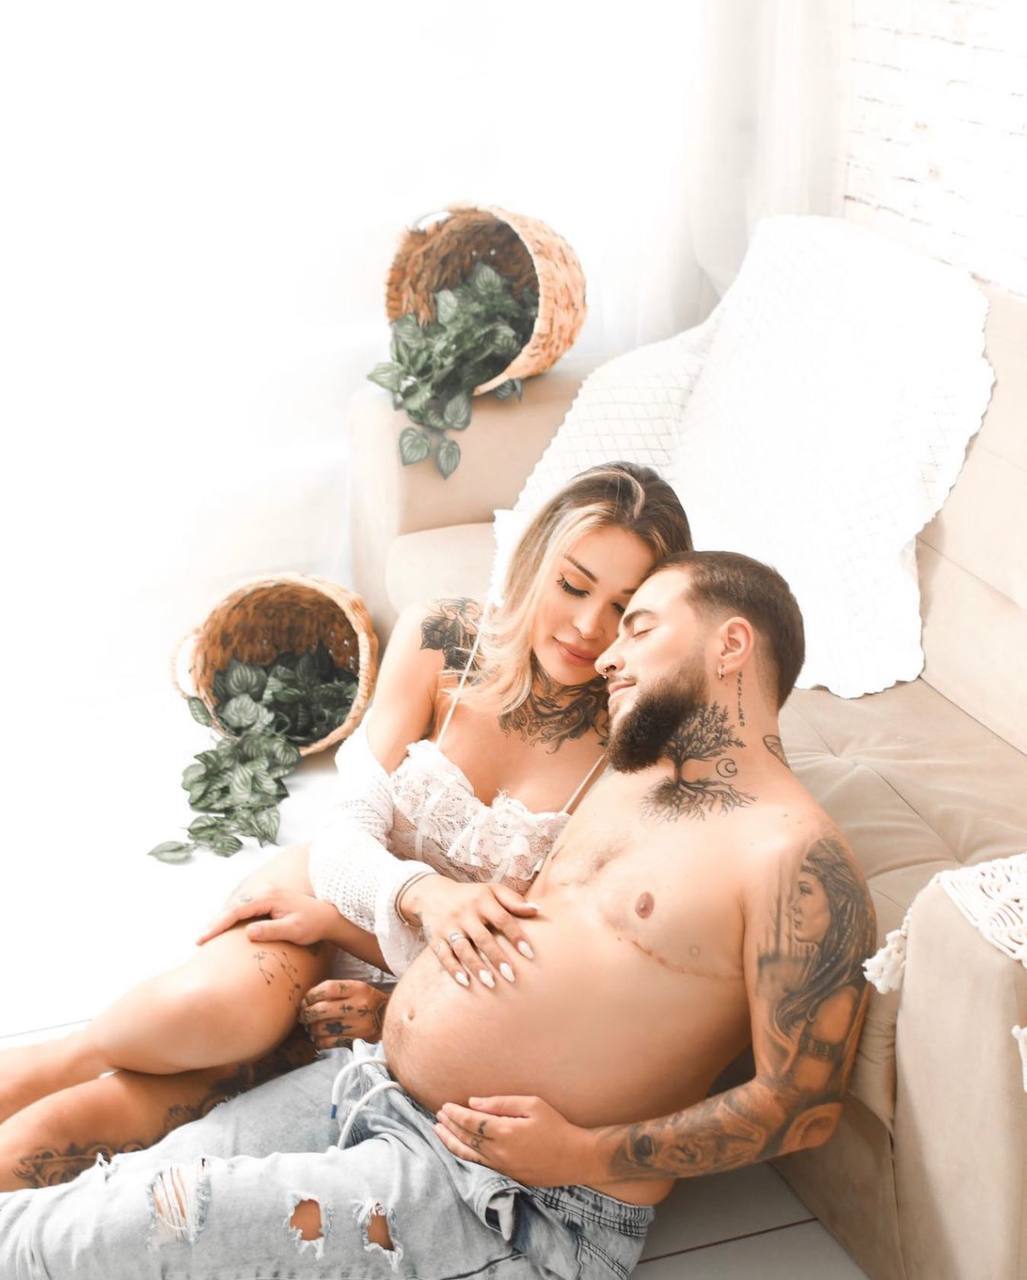 Calvin Klein's underwear ad featuring a pregnant man for Mother's Day -  